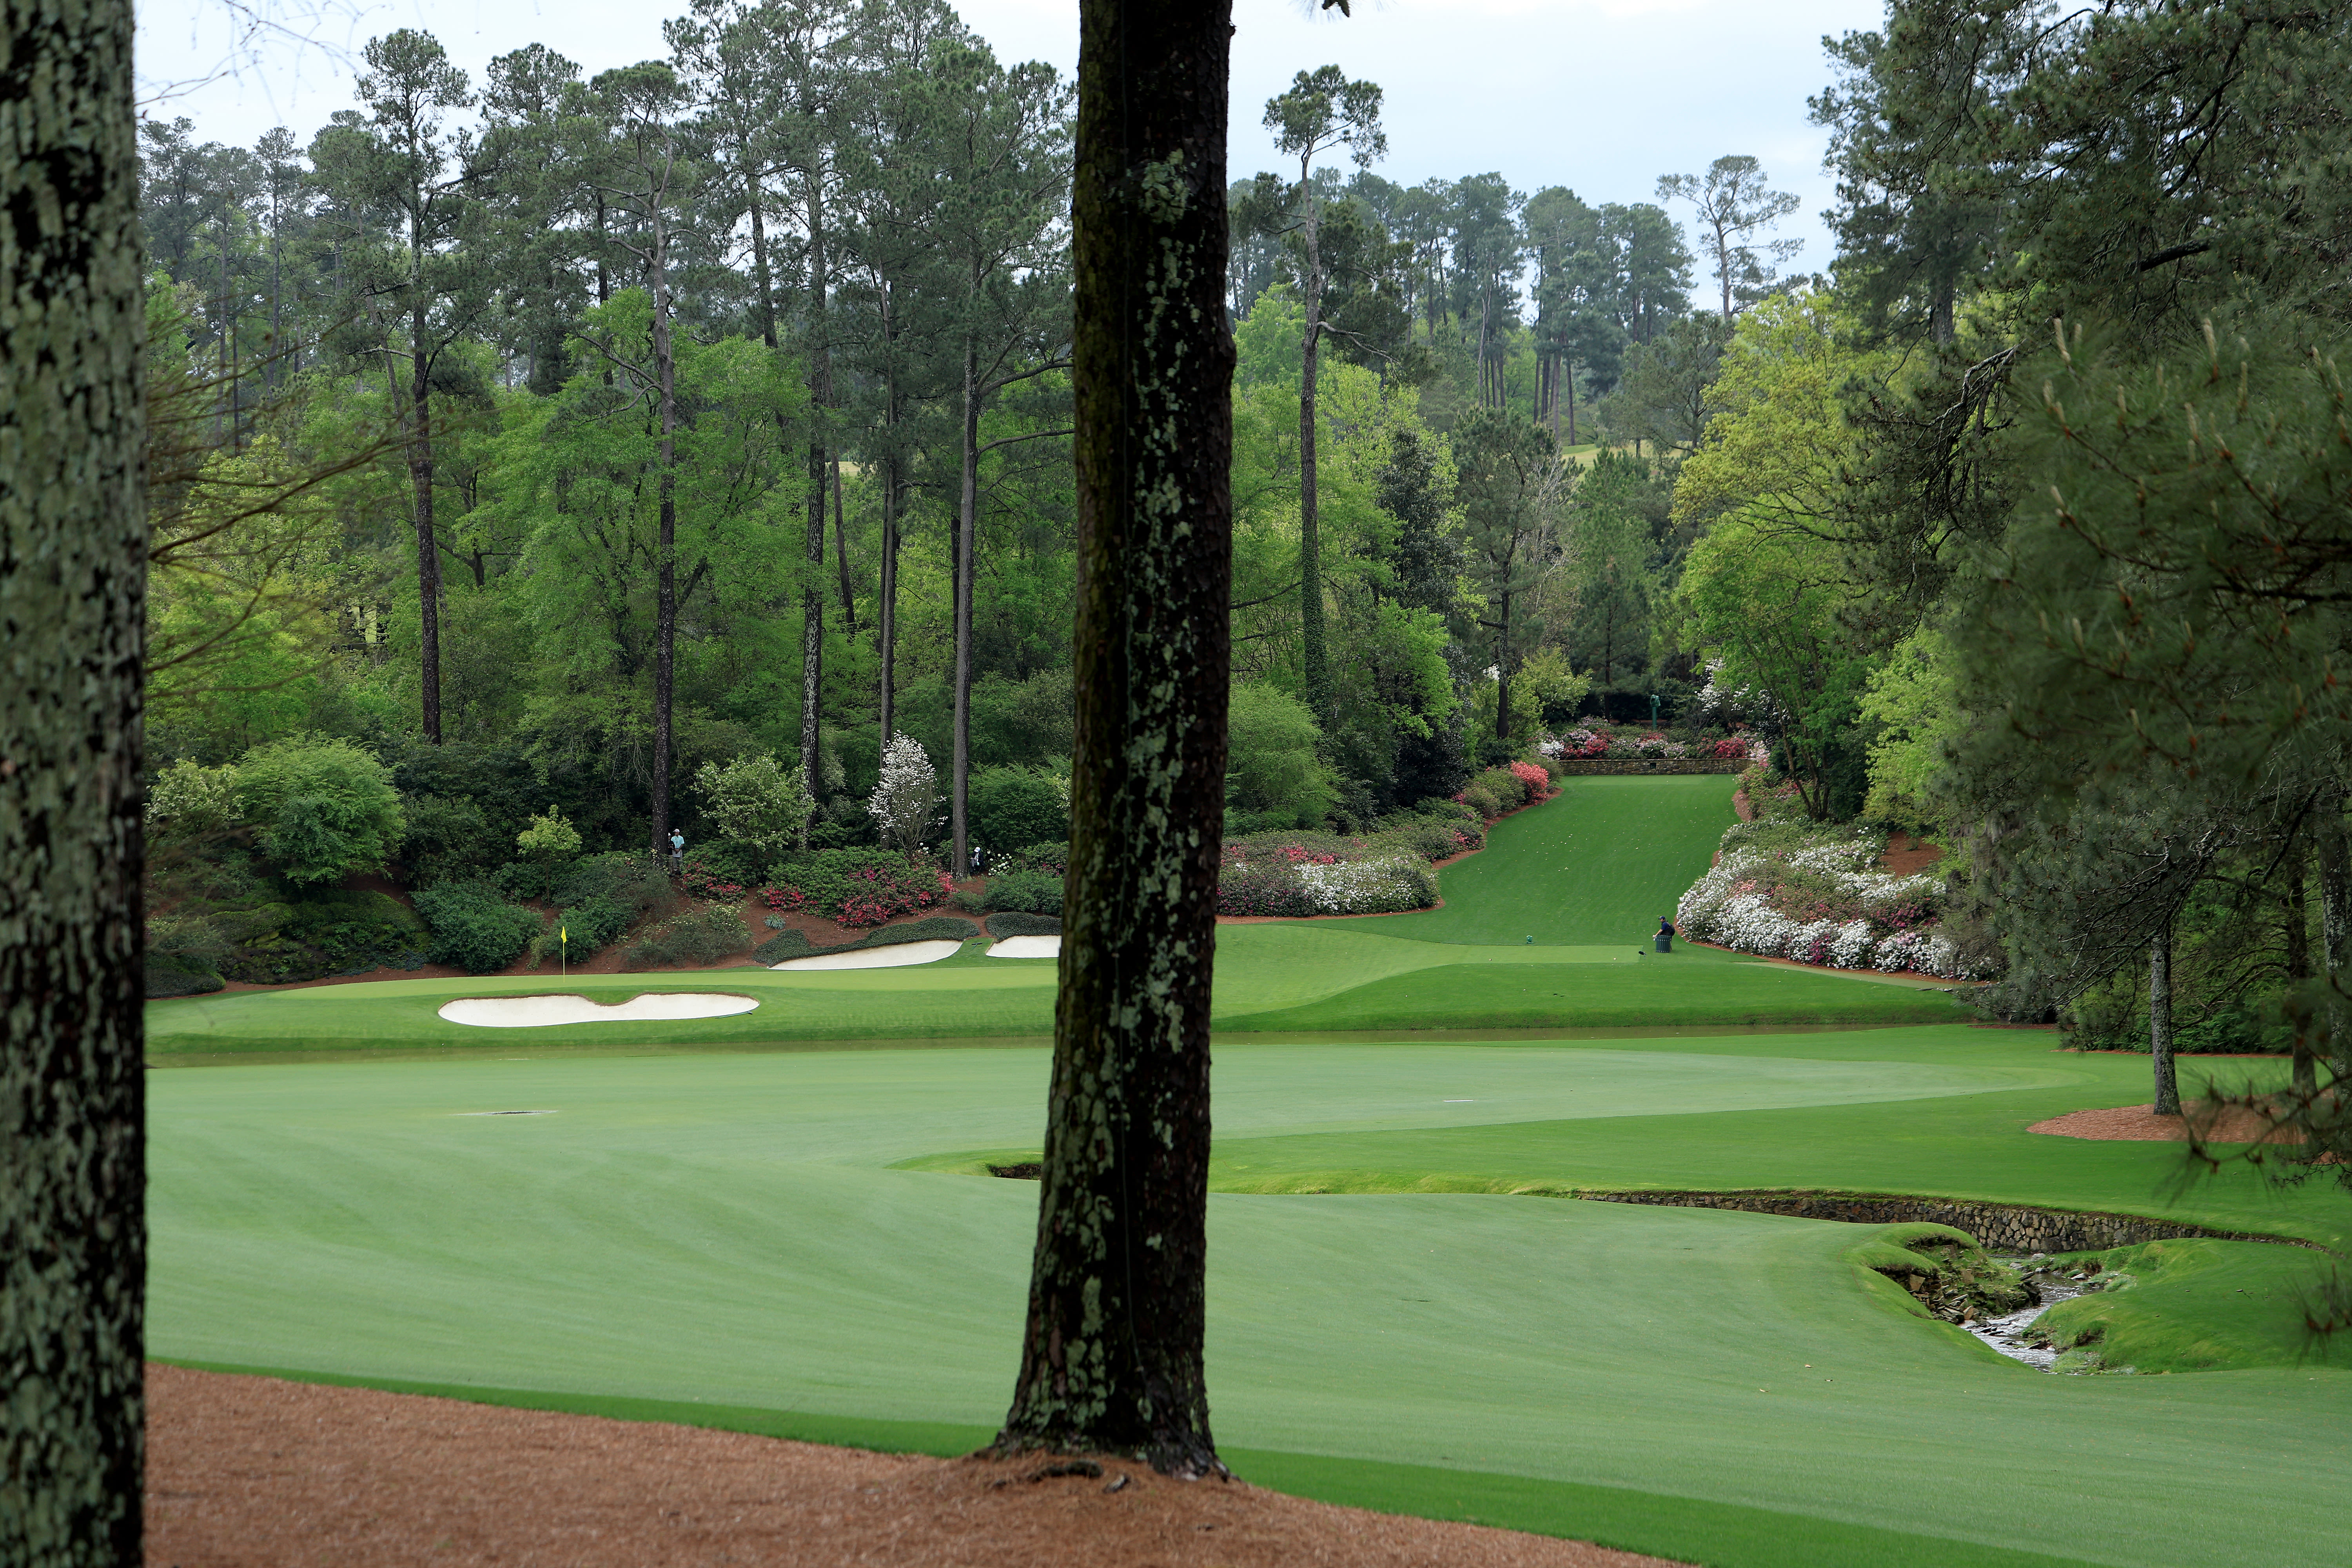 The new tee on No. 13 (top right) adds intrigue to Amen Corner. (David Cannon/Getty Images)